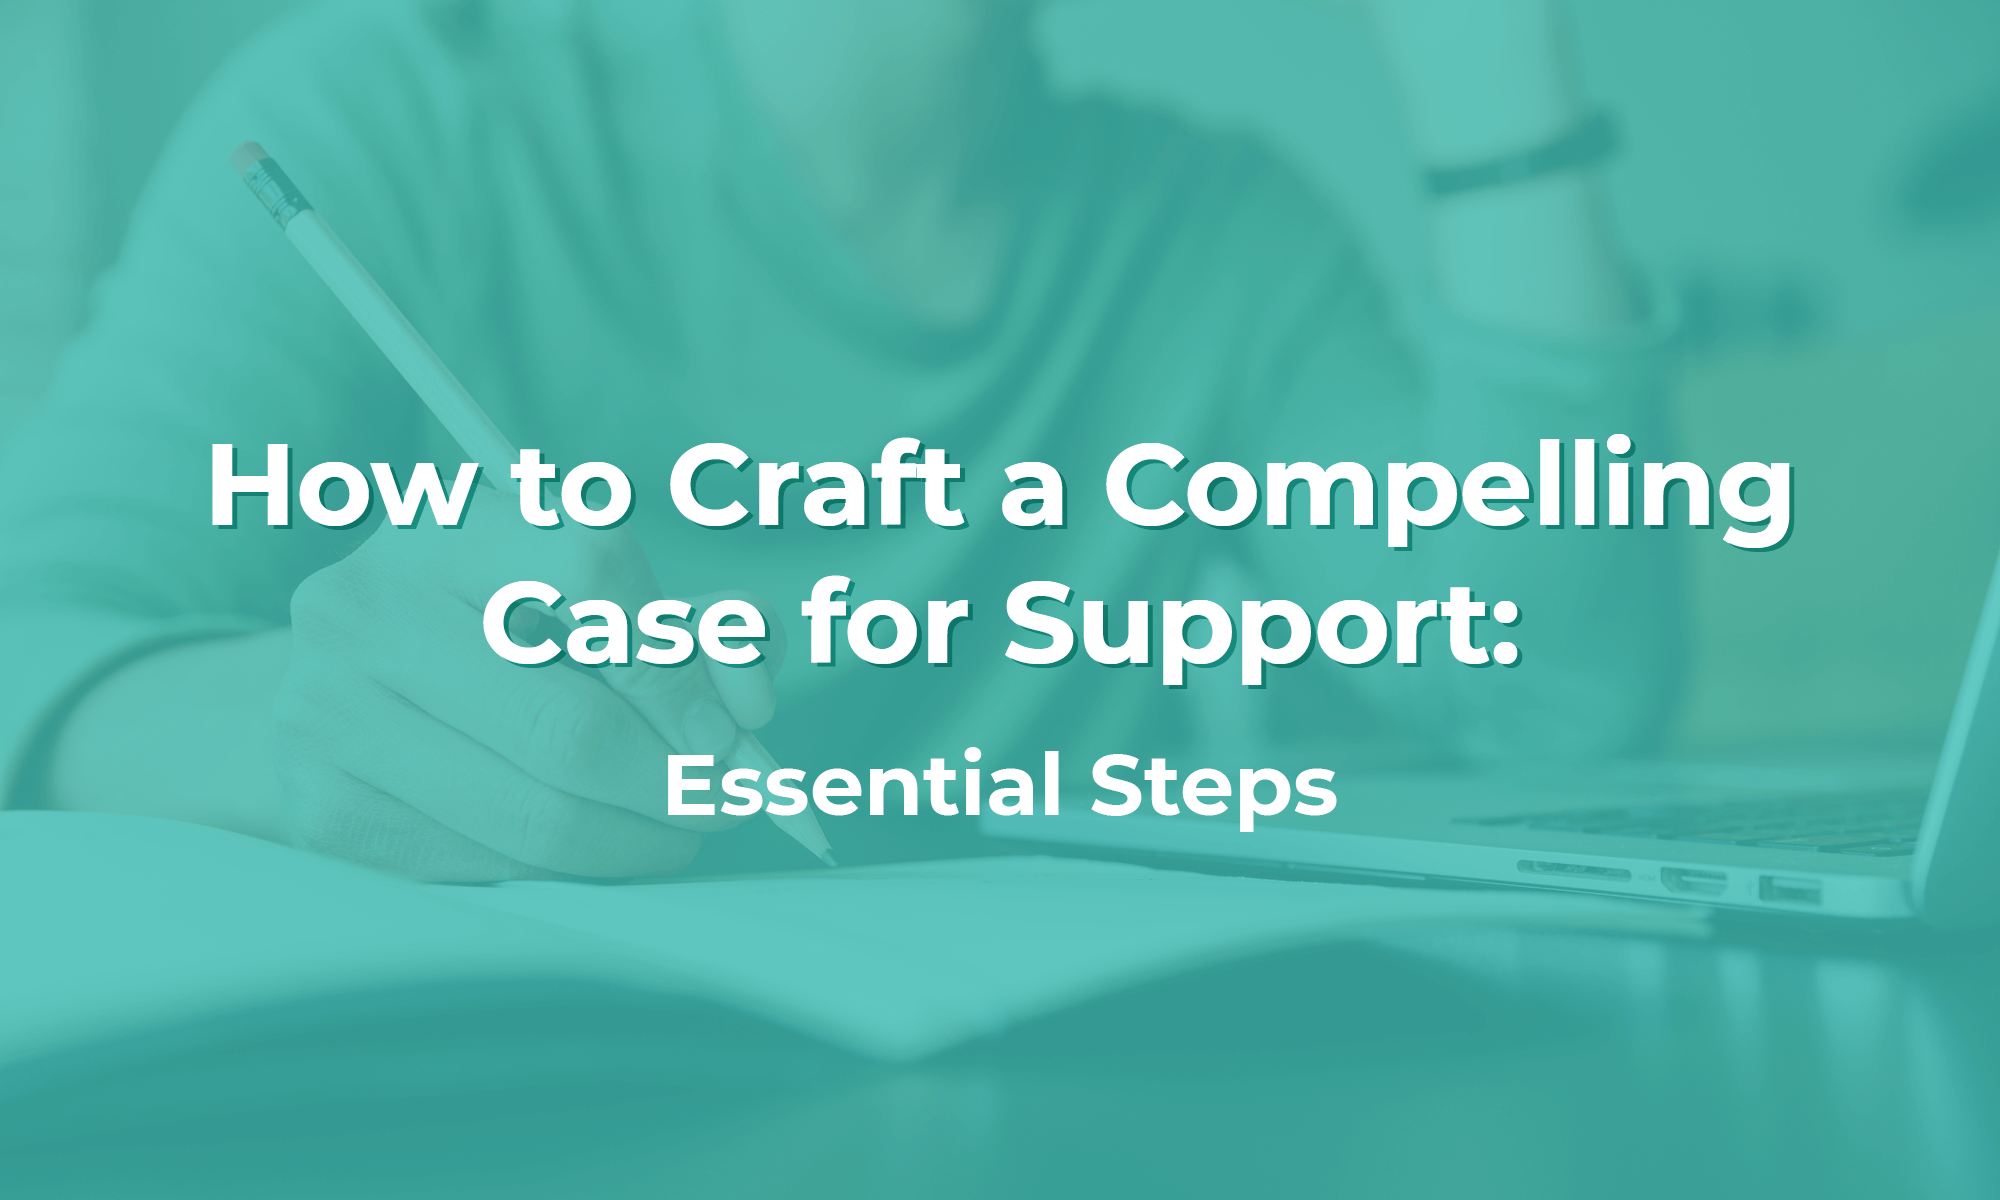 This is a photo of someone writing with the words “How to Craft a Compelling Case for Support: Essential Steps” placed on top of the image.